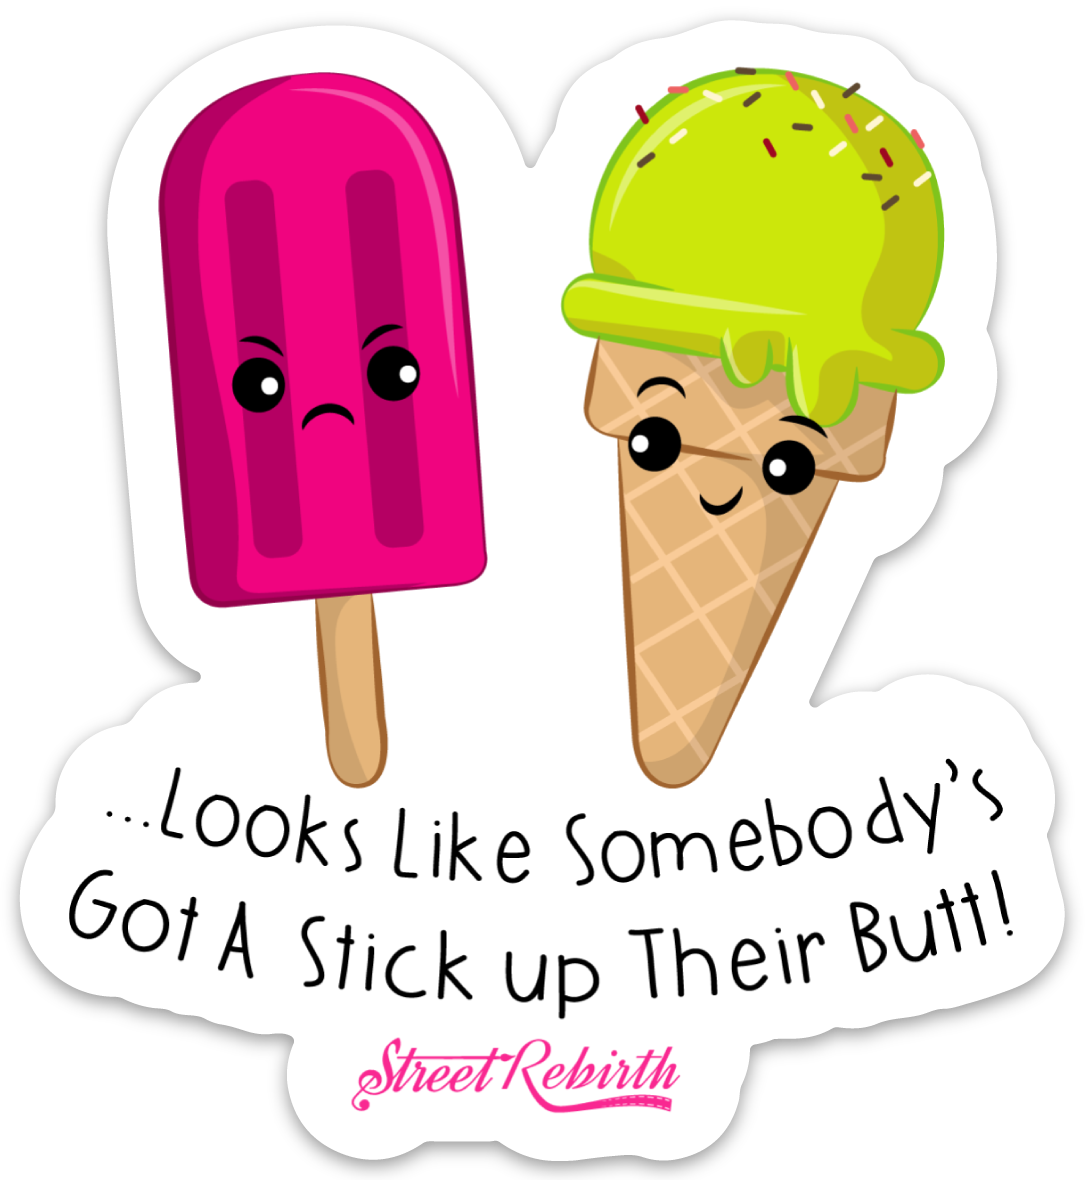 Looks Like Somebody's Got a Stick Up Their Butt! PUN STICKER – ONE 4 INCH WATER PROOF VINYL STICKER – FOR HYDRO FLASK, SKATEBOARD, LAPTOP, PLANNER, CAR, COLLECTING, GIFTING